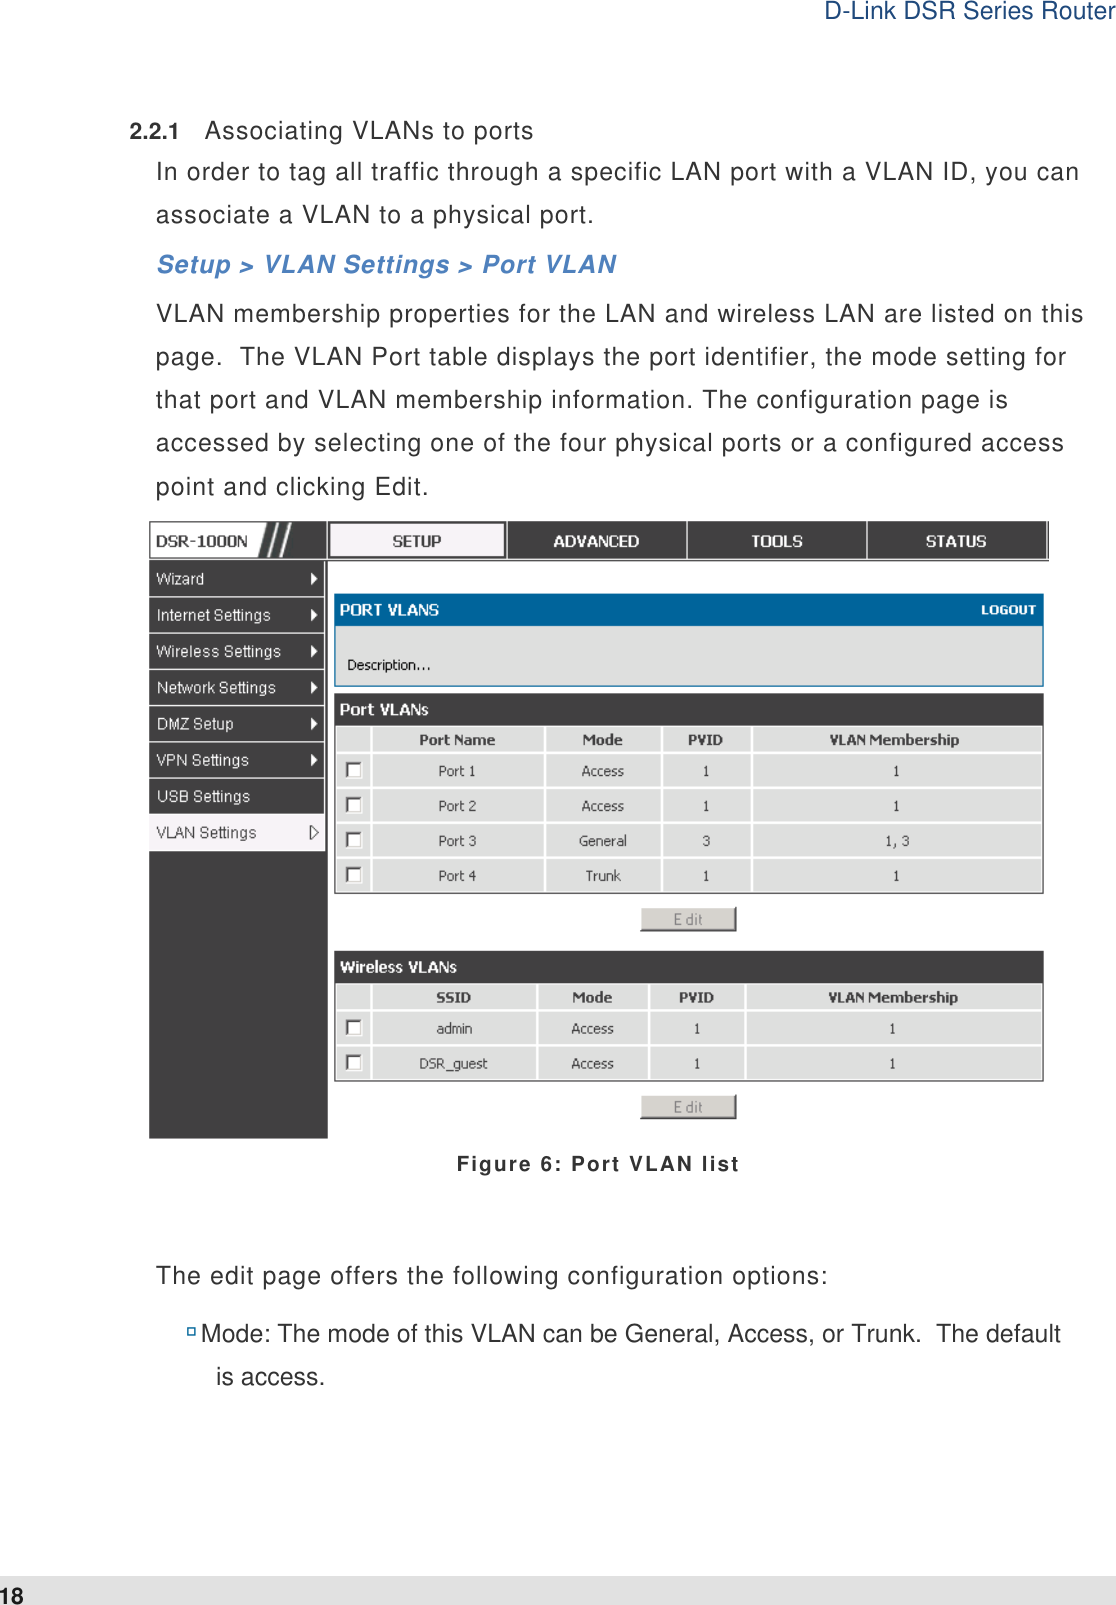 D-Link DSR Series Router 18 2.2.1  Associating VLANs to ports In order to tag all traffic through a specific LAN port with a VLAN ID, you can associate a VLAN to a physical port.   Setup &gt; VLAN Settings &gt; Port VLAN VLAN membership properties for the LAN and wireless LAN are listed on this page.  The VLAN Port table displays the port identifier, the mode setting for that port and VLAN membership information. The configuration page is accessed by selecting one of the four physical ports or a configured access point and clicking Edit.   Figure 6: Port VLAN list  The edit page offers the following configuration options:  Mode: The mode of this VLAN can be General, Access, or Trunk.  The default is access. 